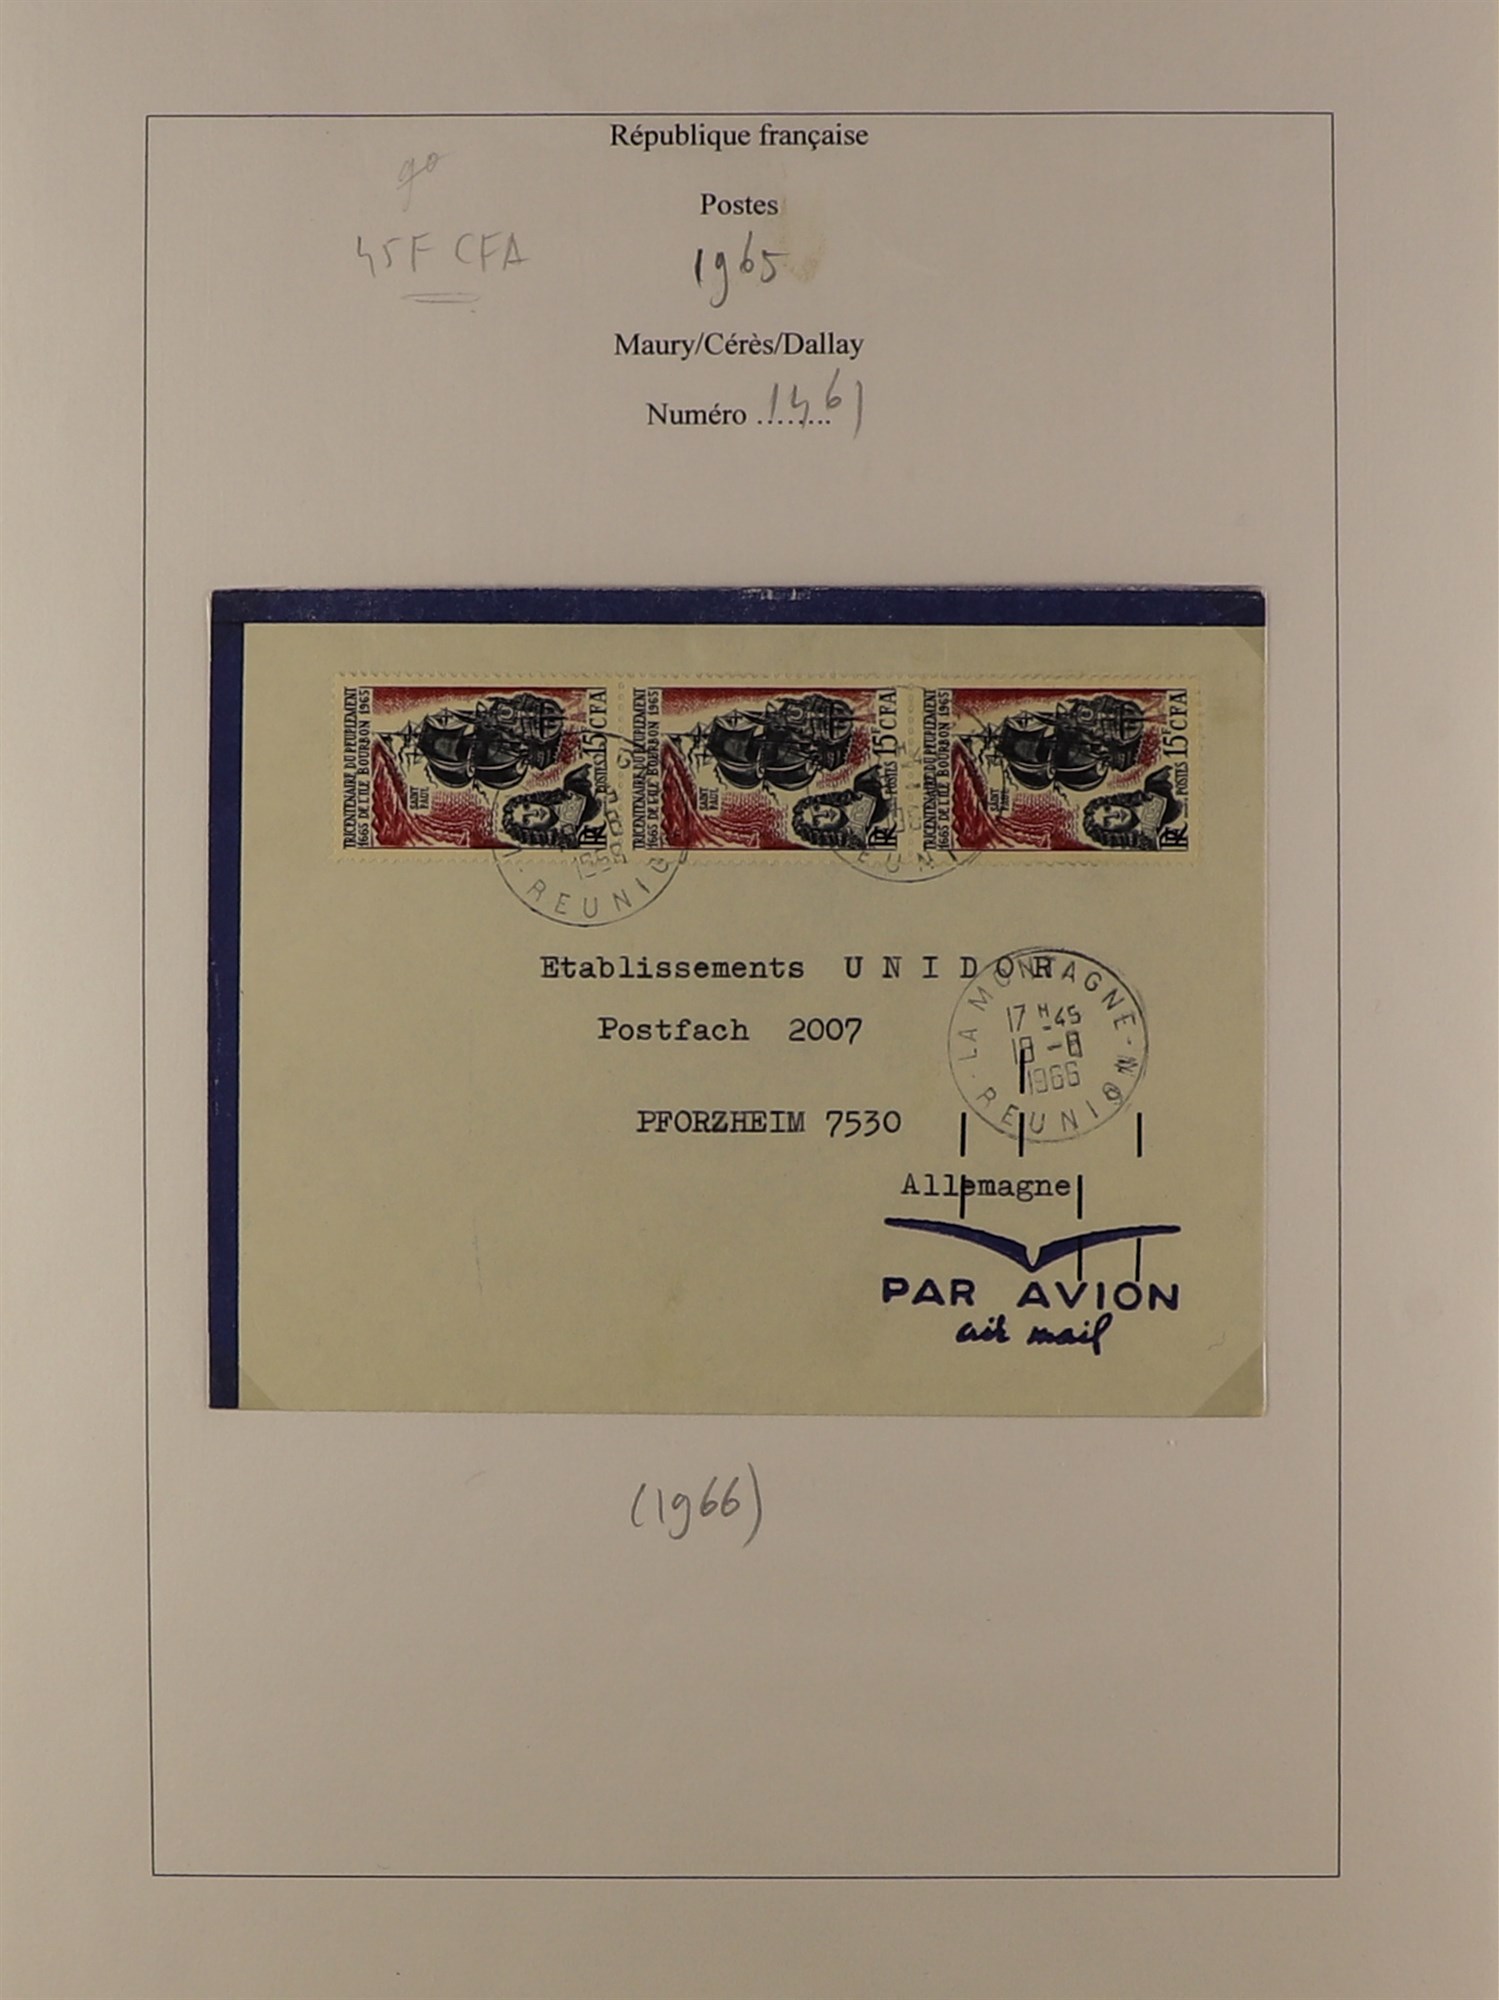 FRANCE 1960 - 1965 COVERS / CARDS COLLECTION of commemorative stamps on covers, cards, parcel labels - Image 4 of 24